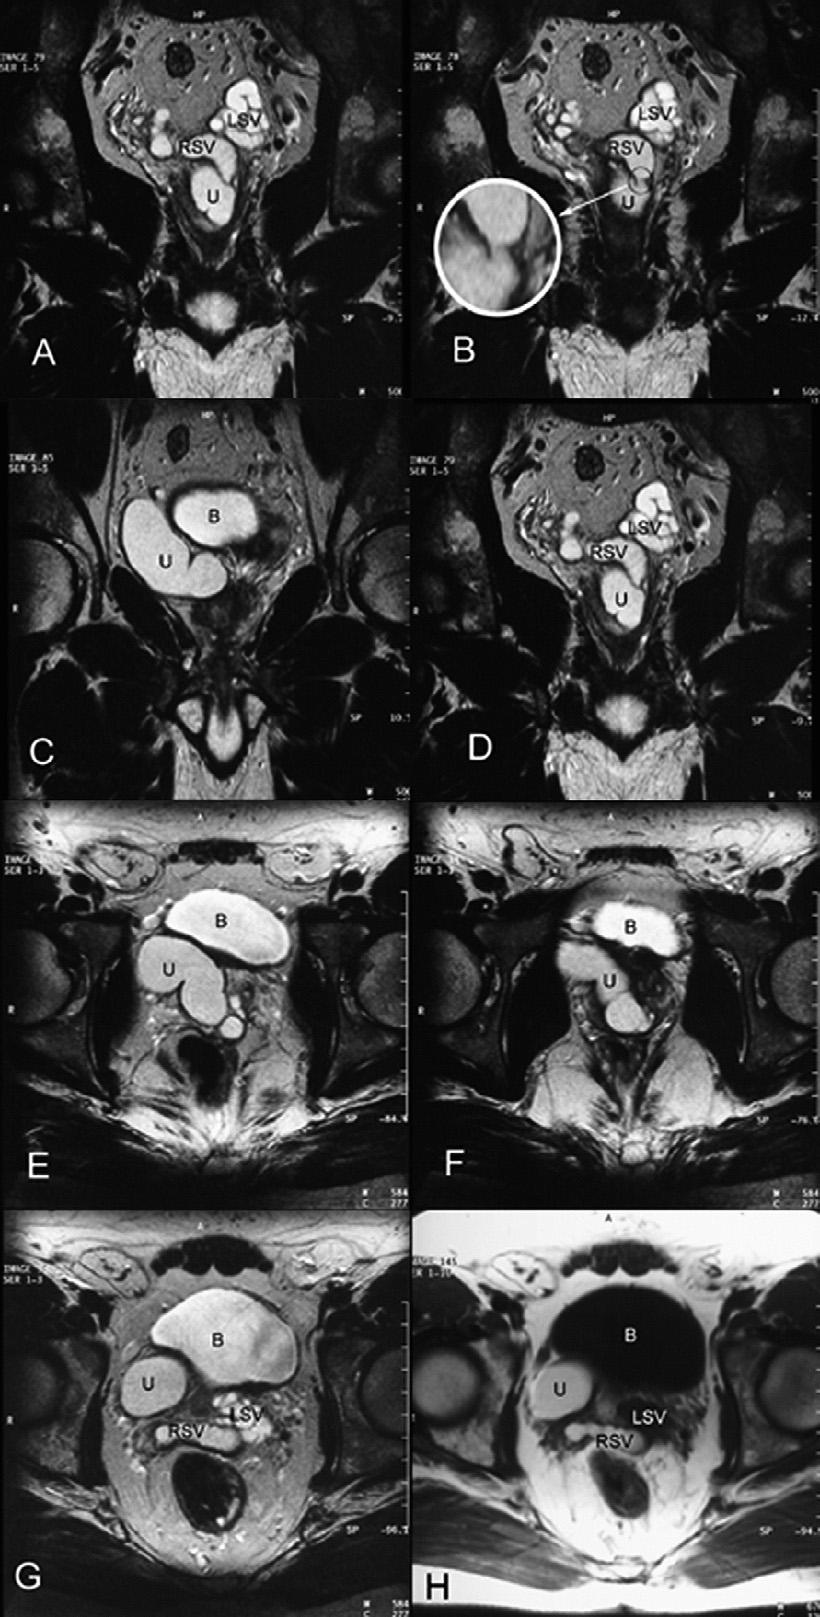 270 european urology 52 (2007) 268 272 Fig. 2 (A) T2-weighted coronal scan. Ectopic ureter (U) passes through the posterior wall of the bladder and the right seminal vesicle (RSV).